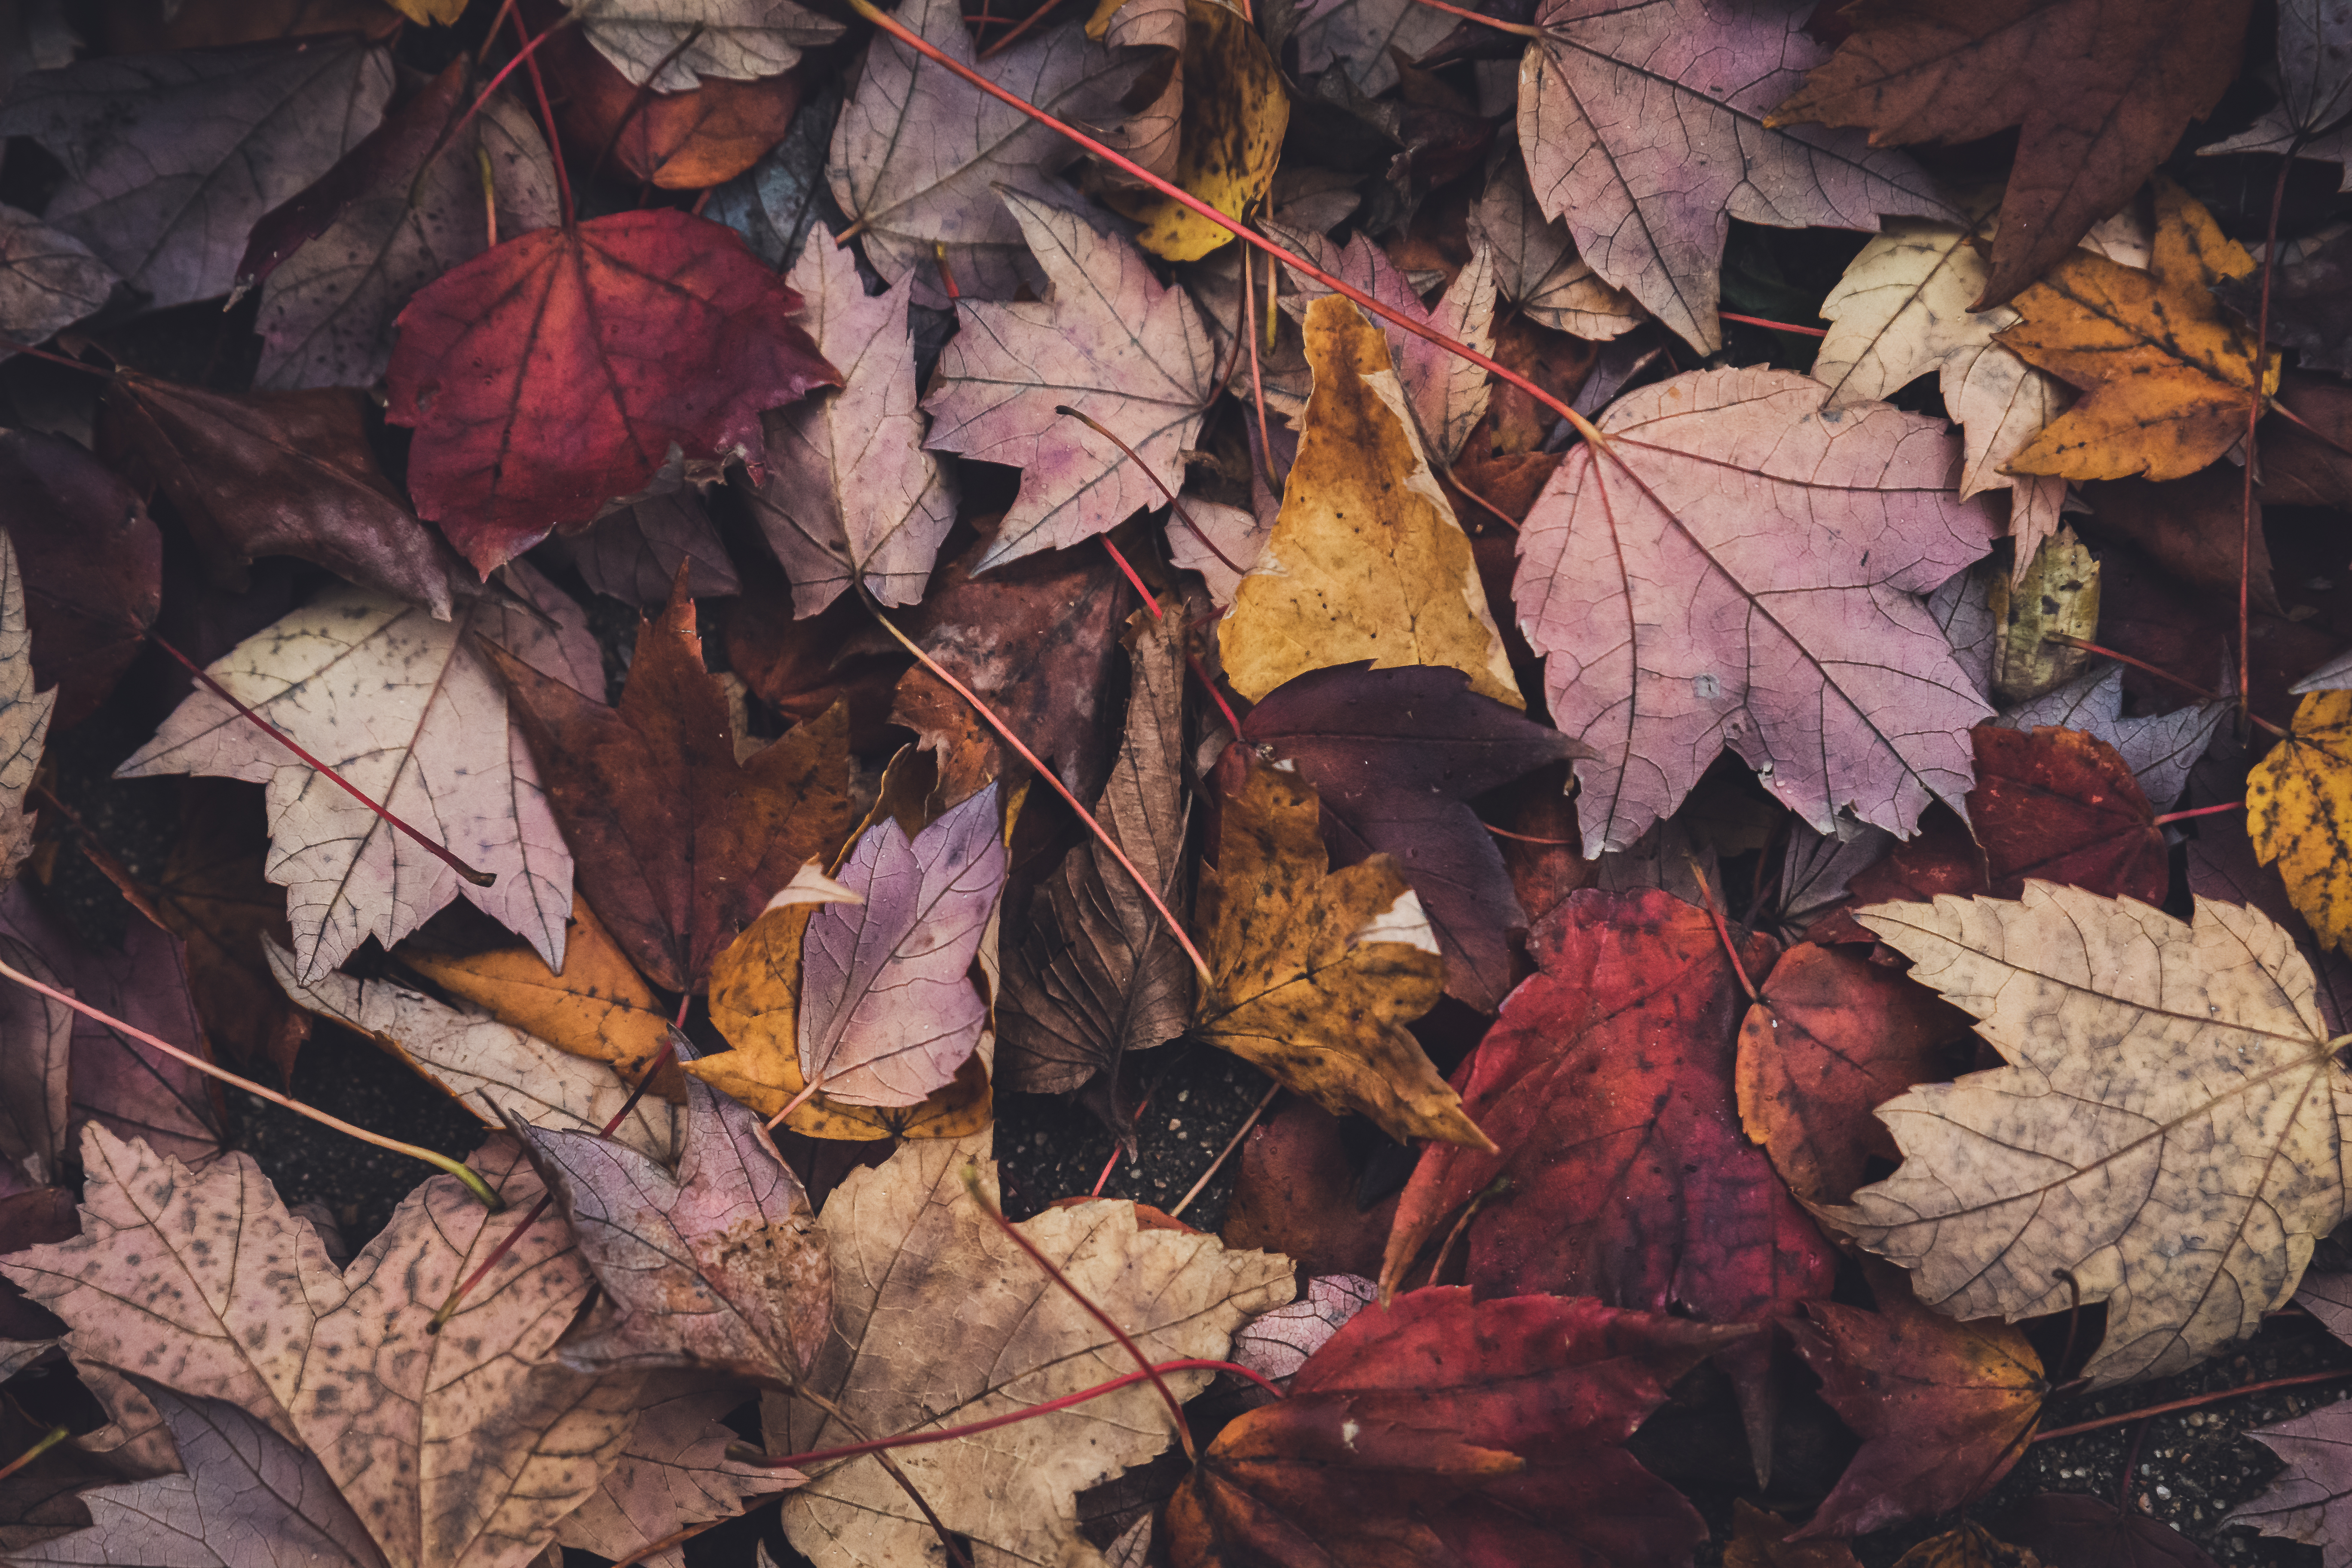 red autumn leaves background